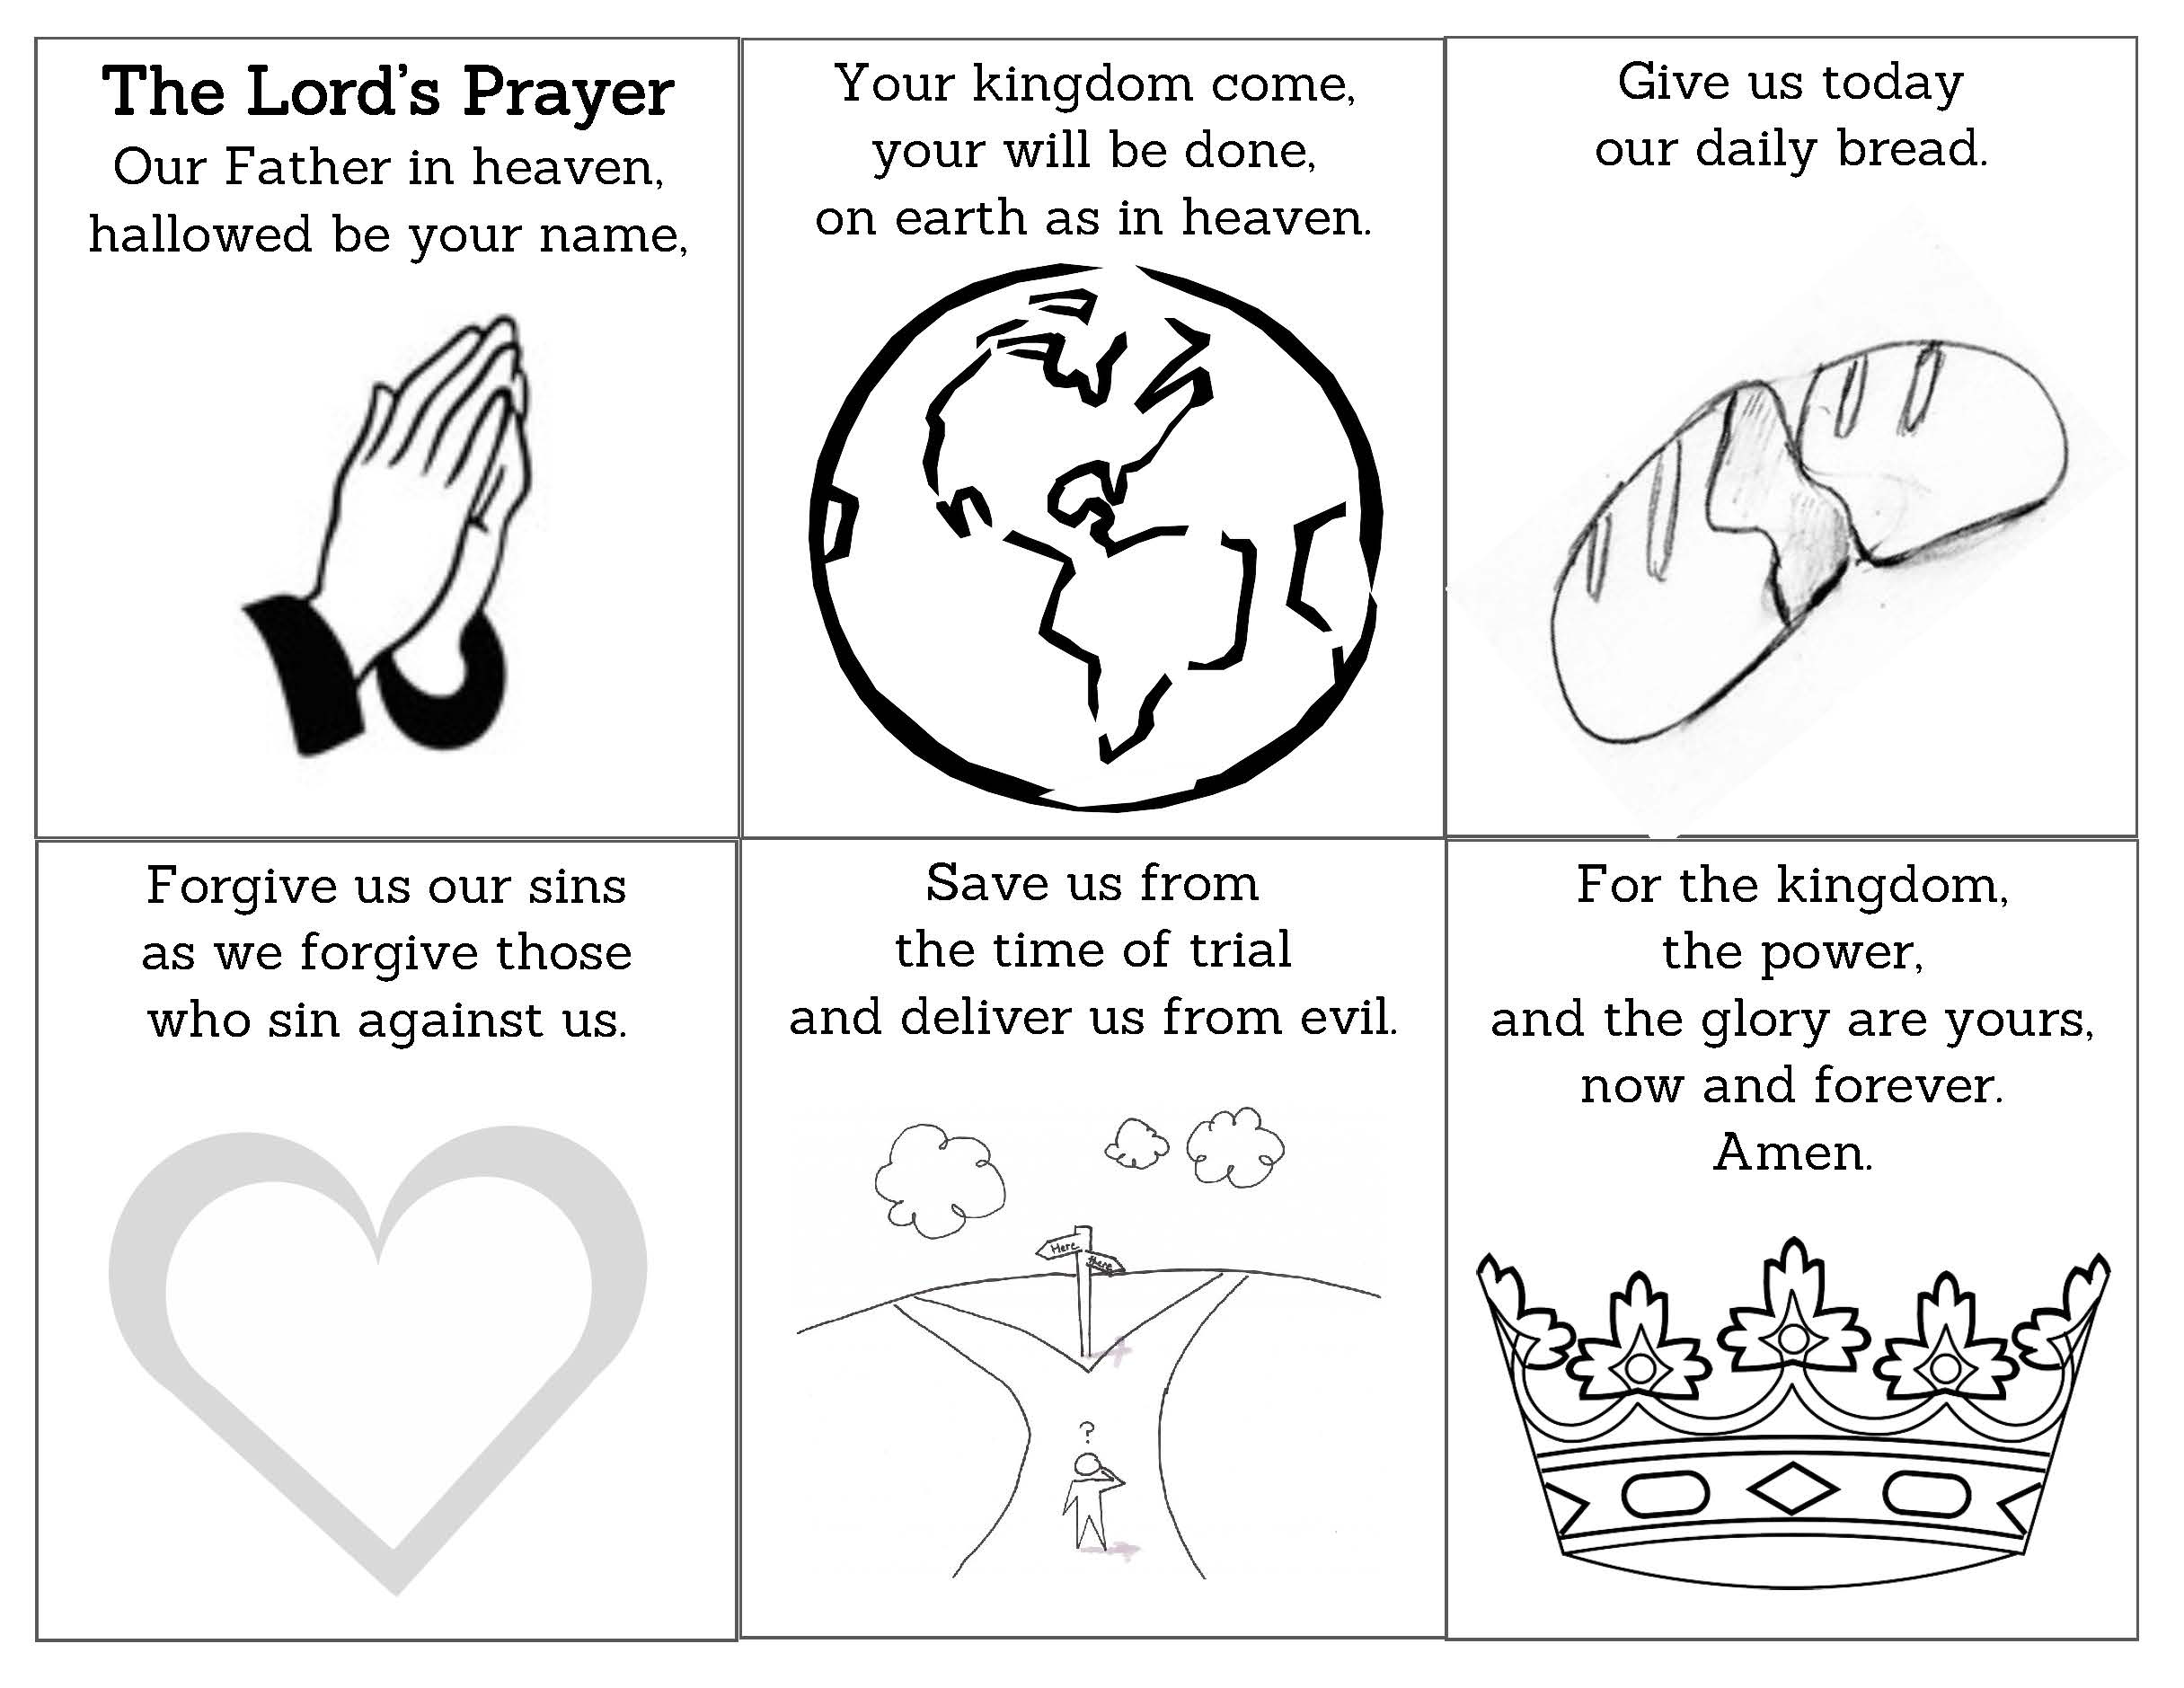 Lord's Prayer coloring activity - Concordia Lutheran Church Chicago